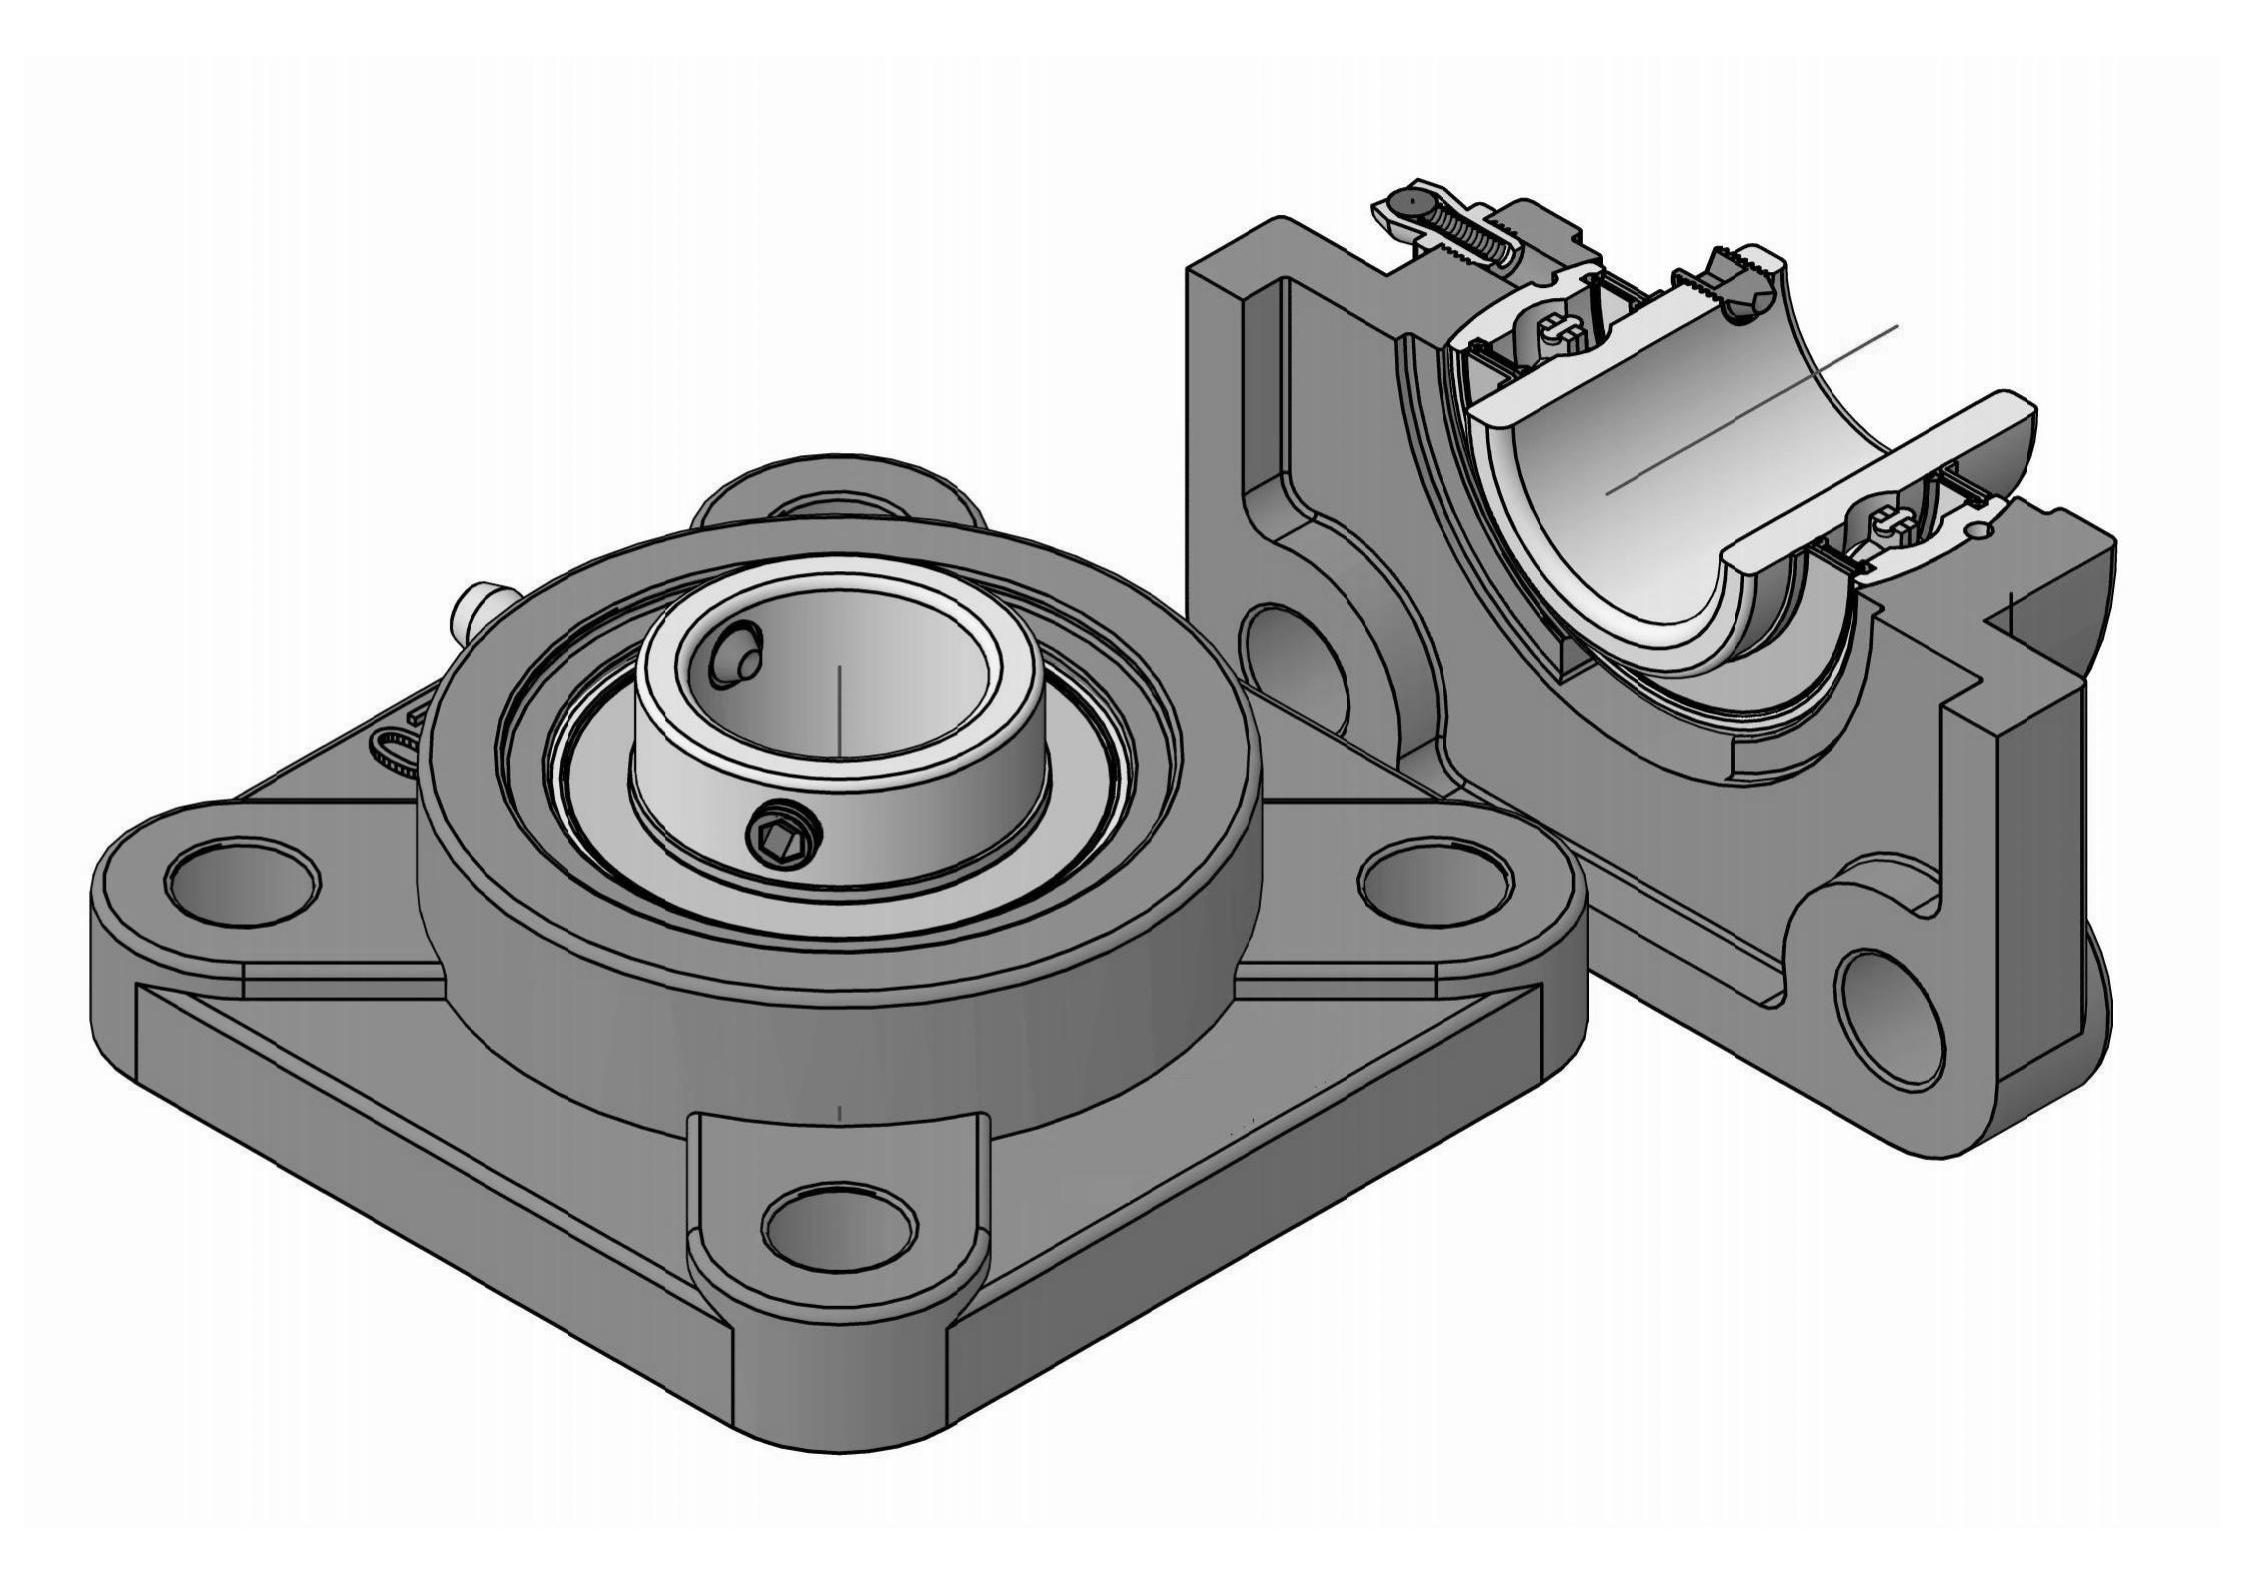 UCFX11-36 four Bolt Square flange bearing units with 2-1/4 inch bore